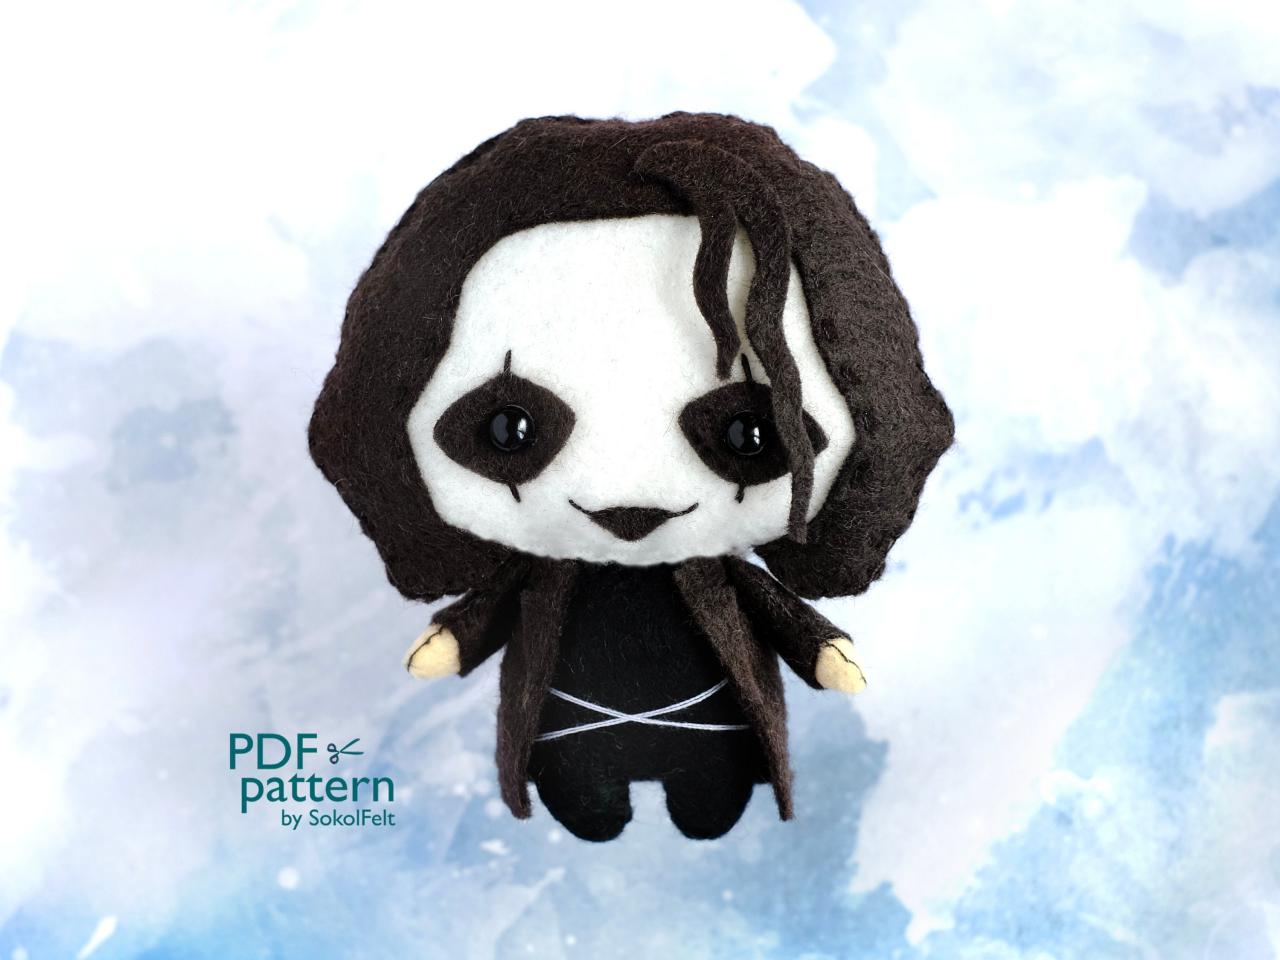 The Crow Felt Toy Pdf And Svg Patterns, The Crow Movie, Halloween Plush Toy Sewing Pdf Tutorial